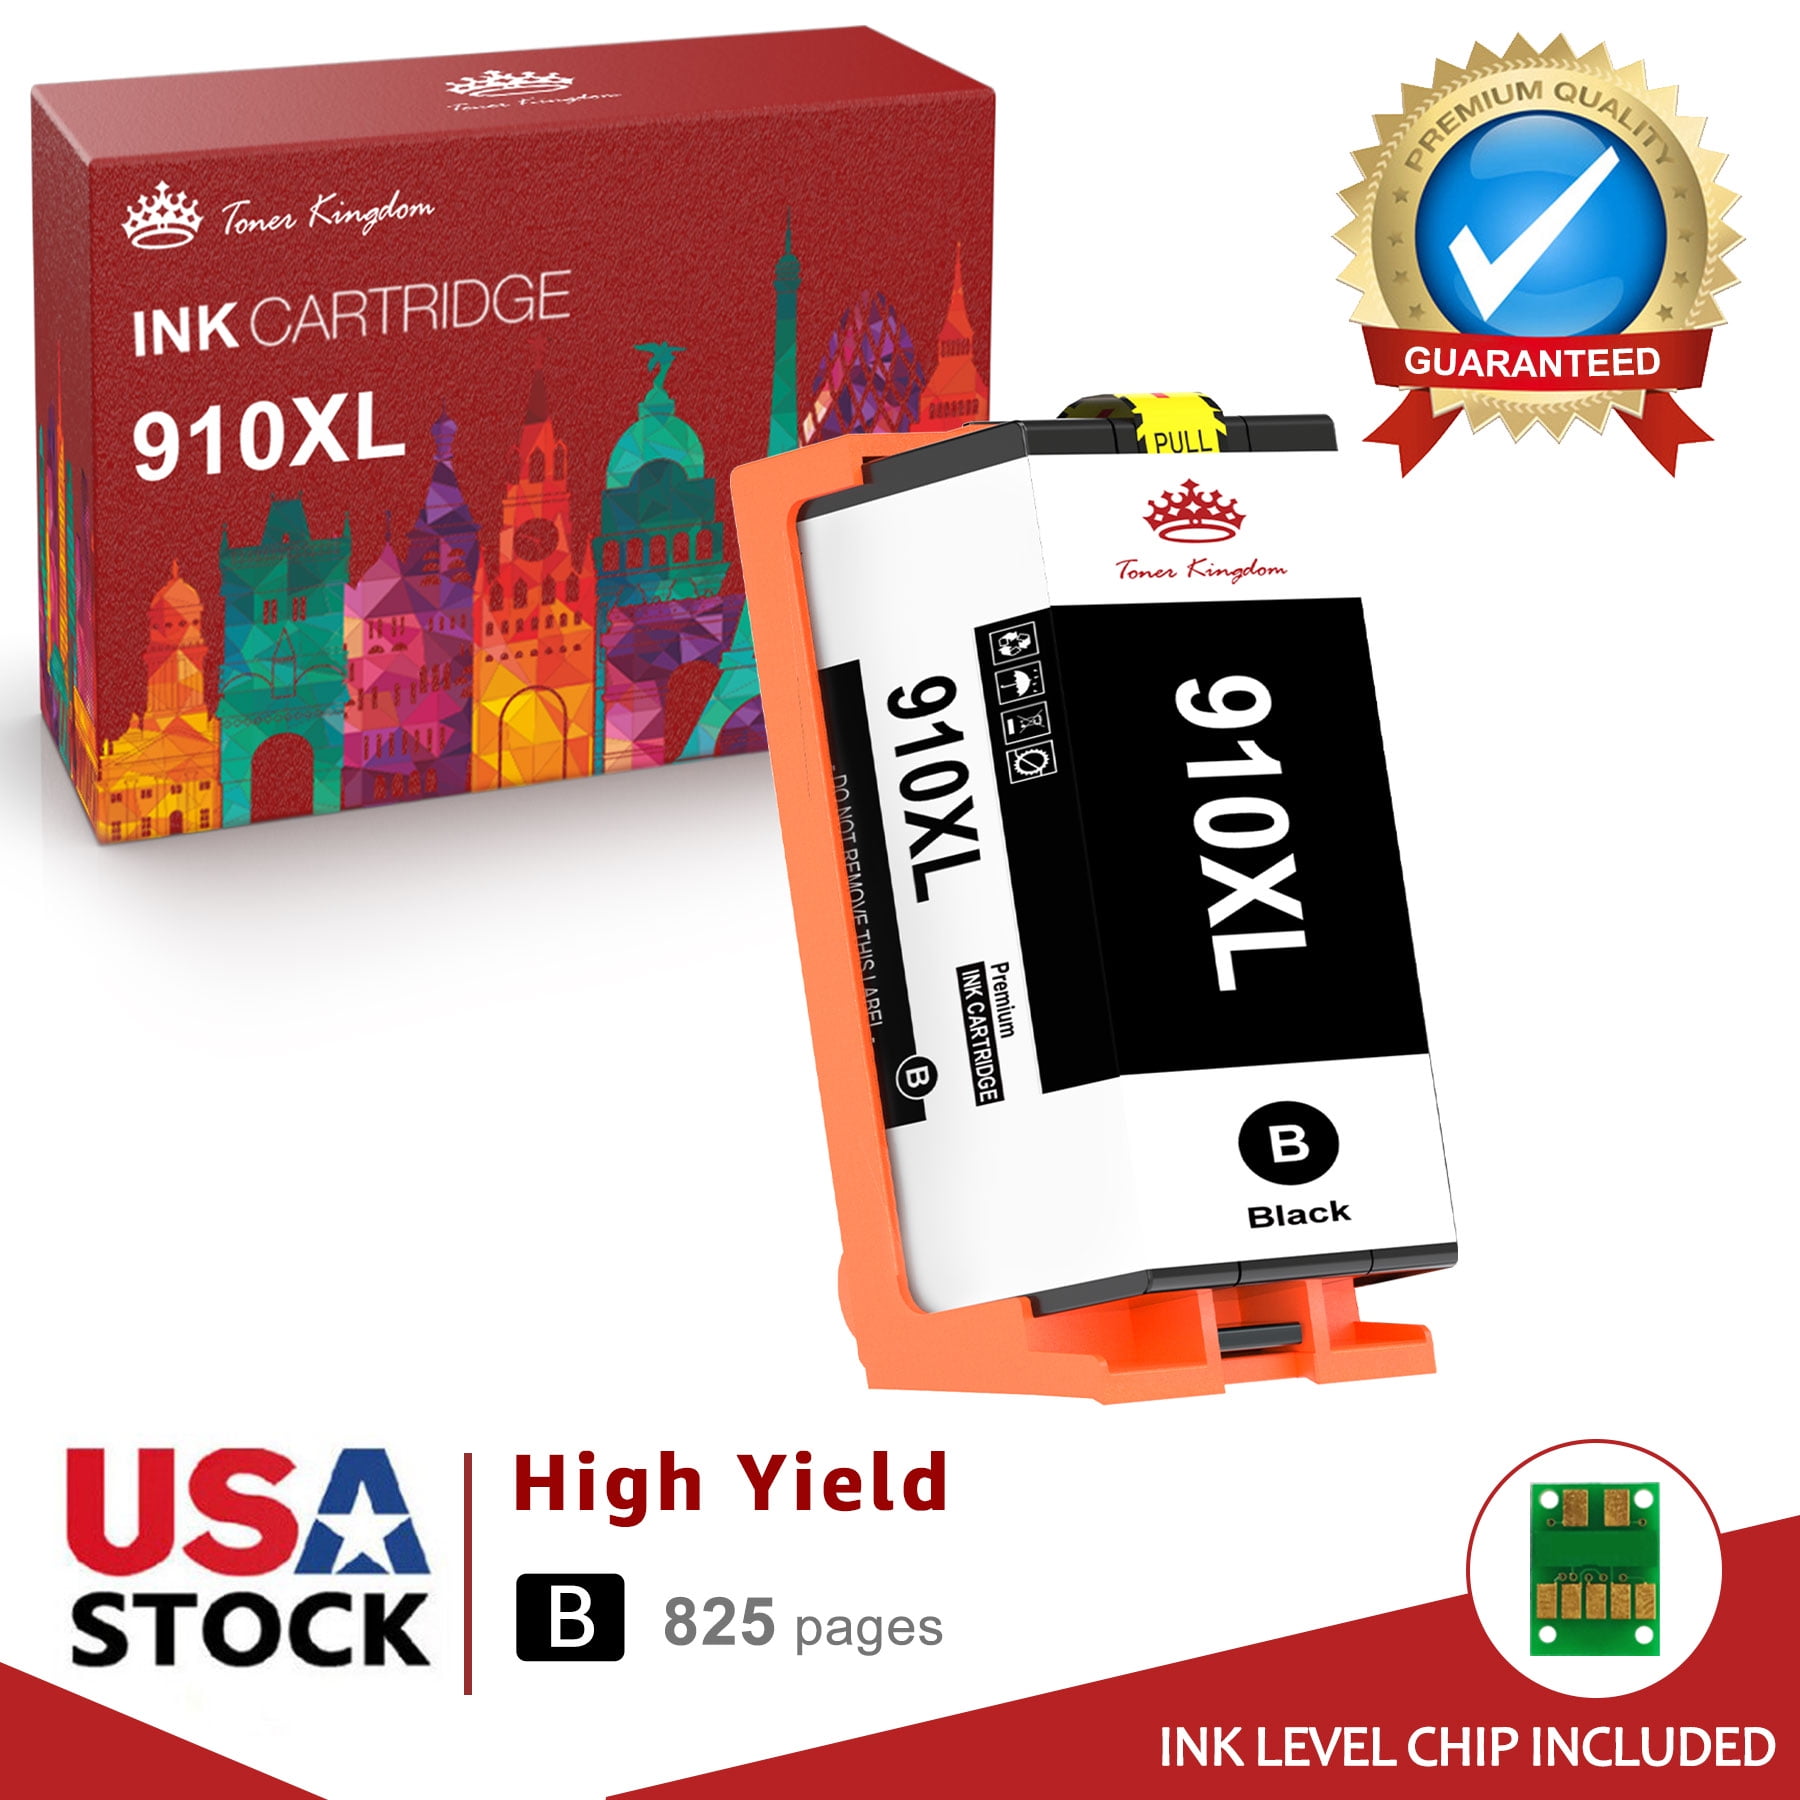 High Yield 910XL Black Ink Cartridge Replacement for 910 XL HP Printer Ink  for OfficeJet Pro 8020 8030 8025 8035 8028 OfficeJet 8022 8010 8015  (1-Pack) 